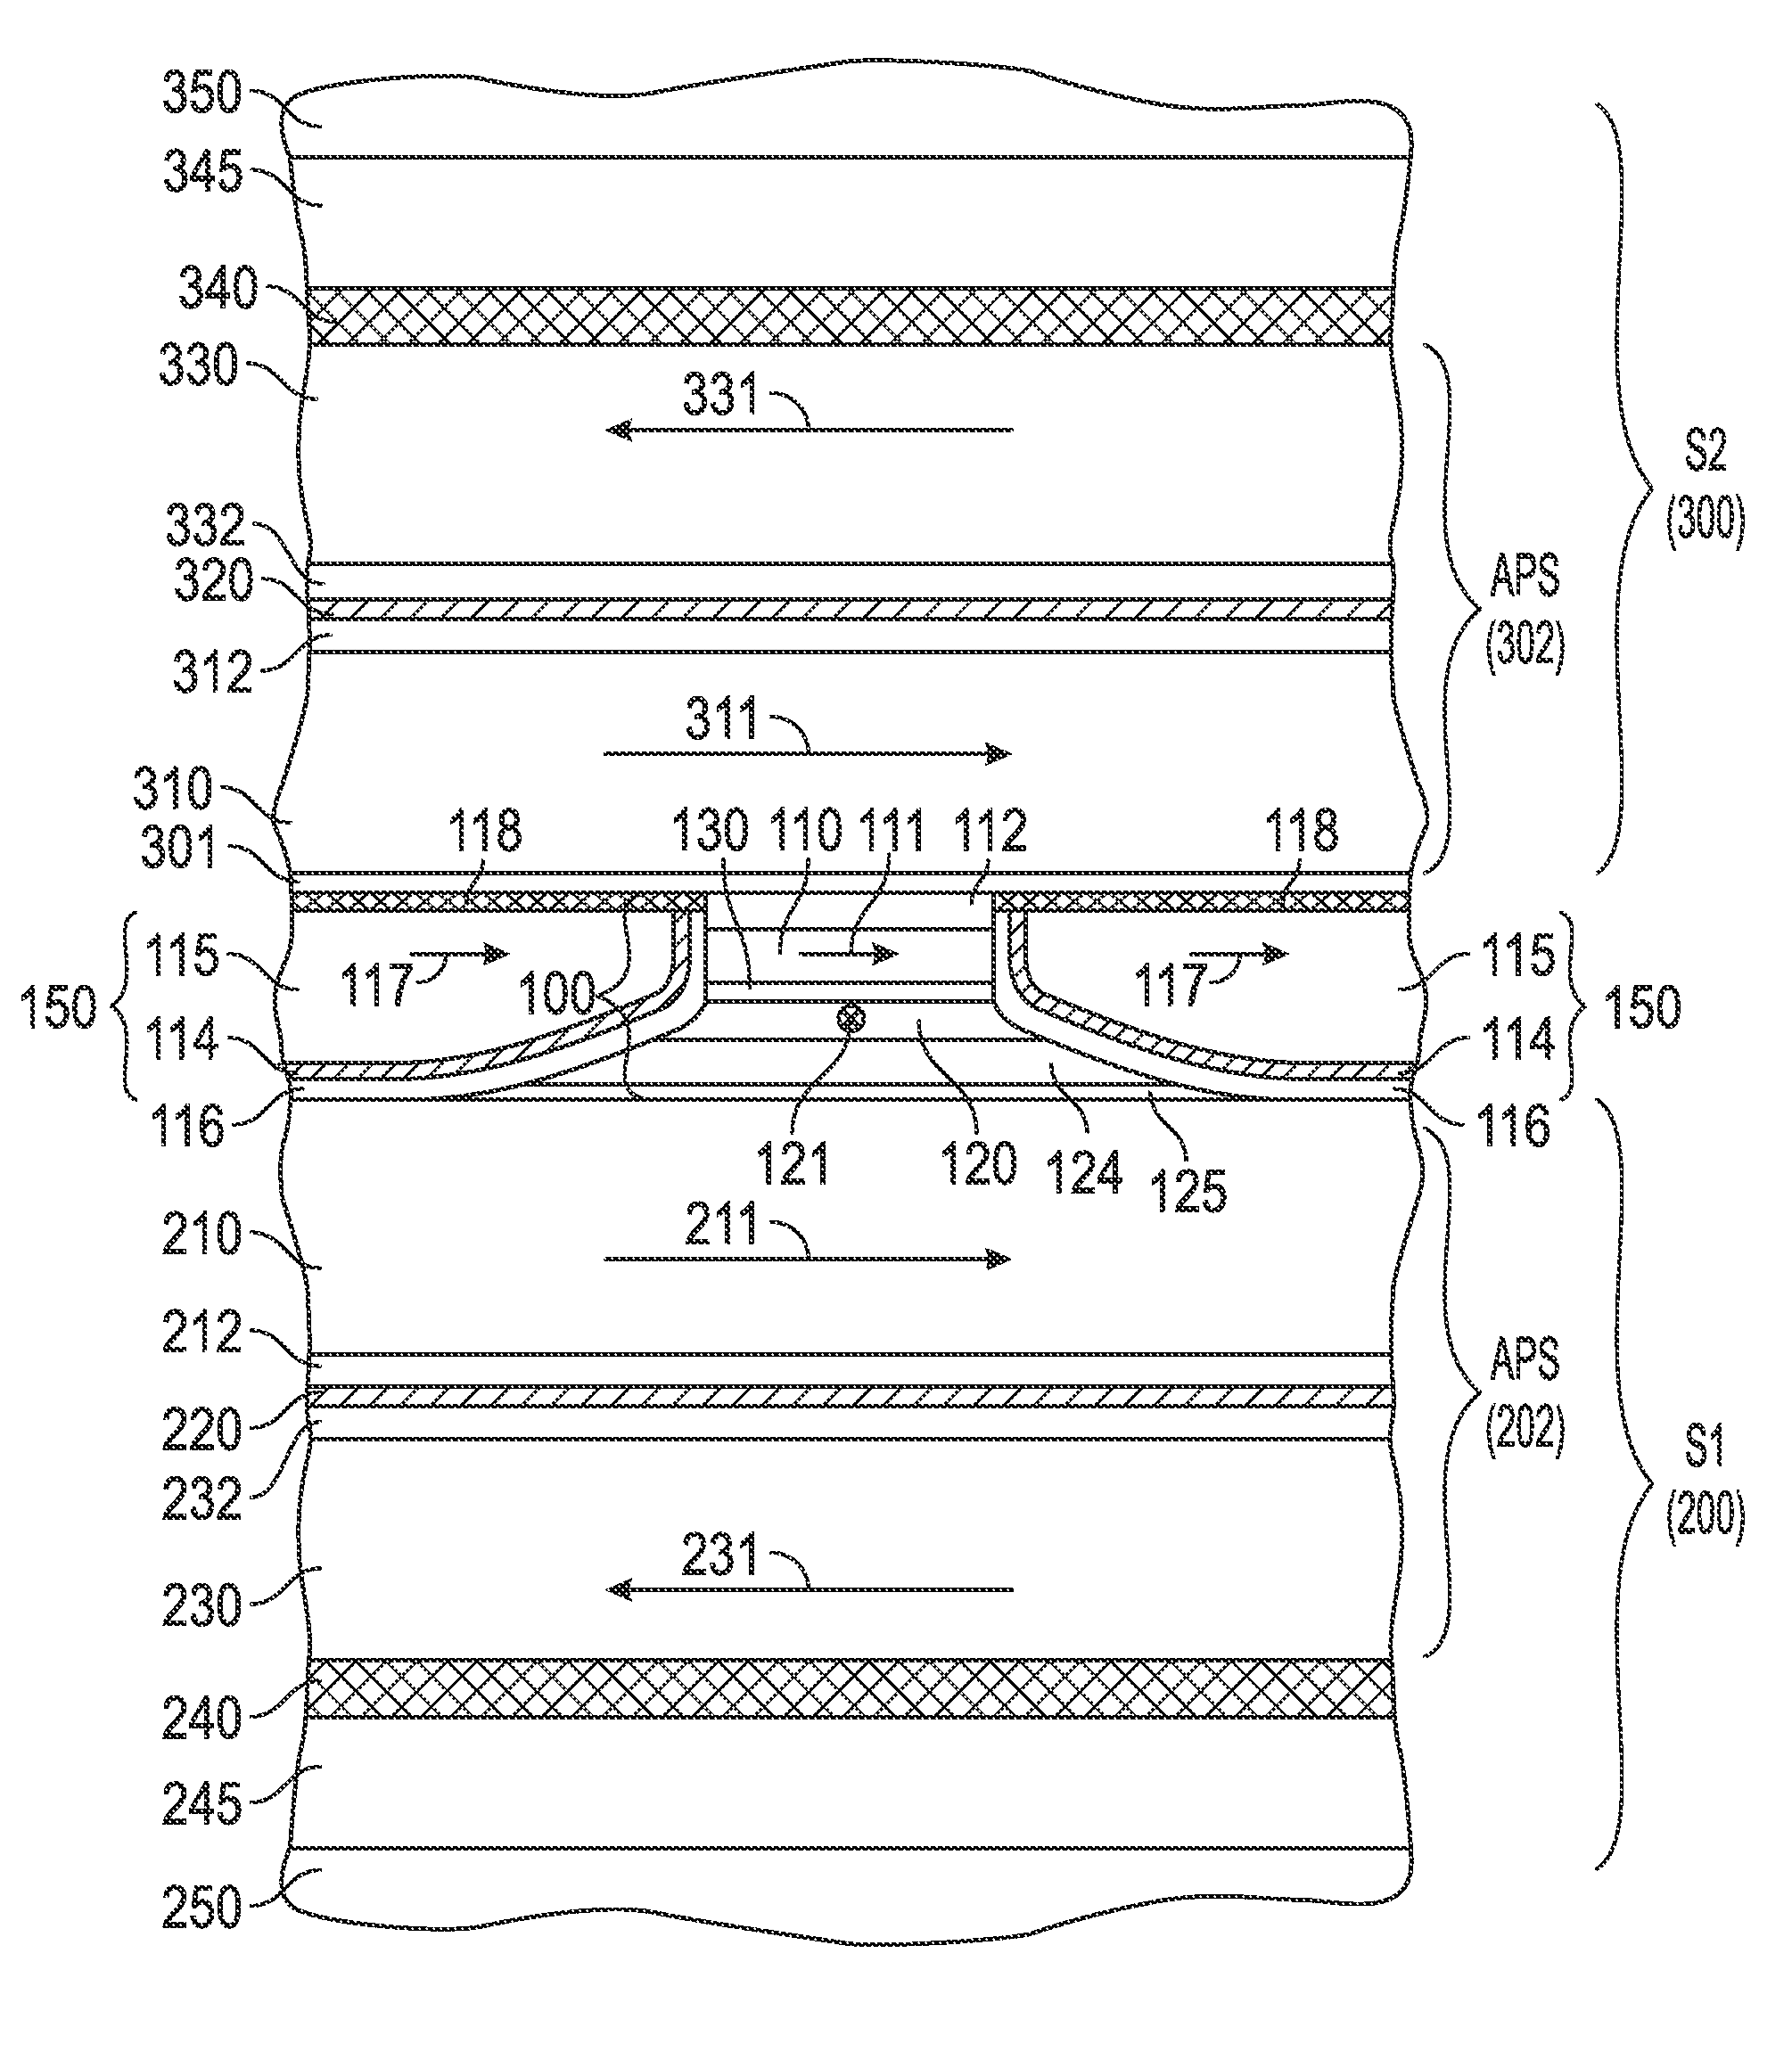 Current-perpendicular-to-the-plane (CPP) magnetoresistive (MR) sensor having a top shield with an antiparallel structure